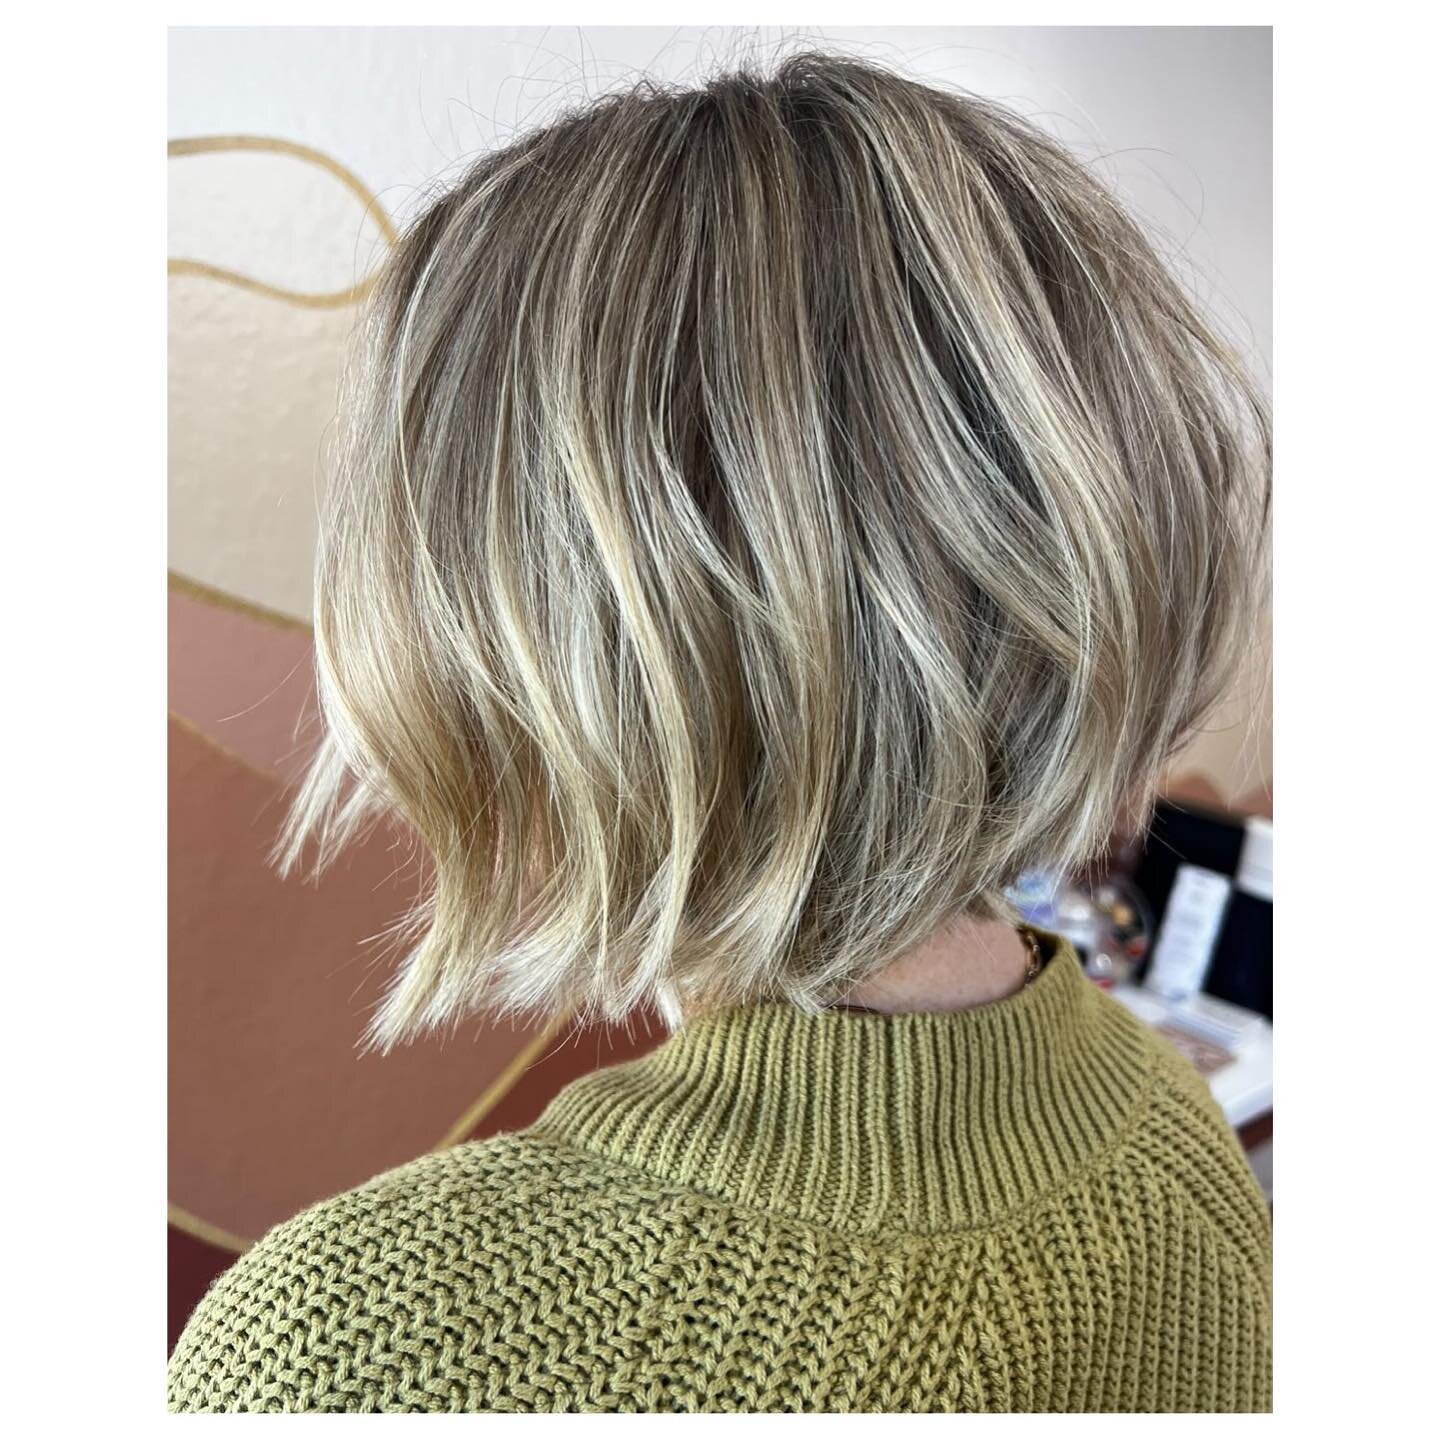 Love when my clients take bold seasonal hair transitions 🤩 ✂️

I will be your Fairy Hair Godmother anytime 🪄 

#edgyhaircut #shorthairgoals #holidayhair